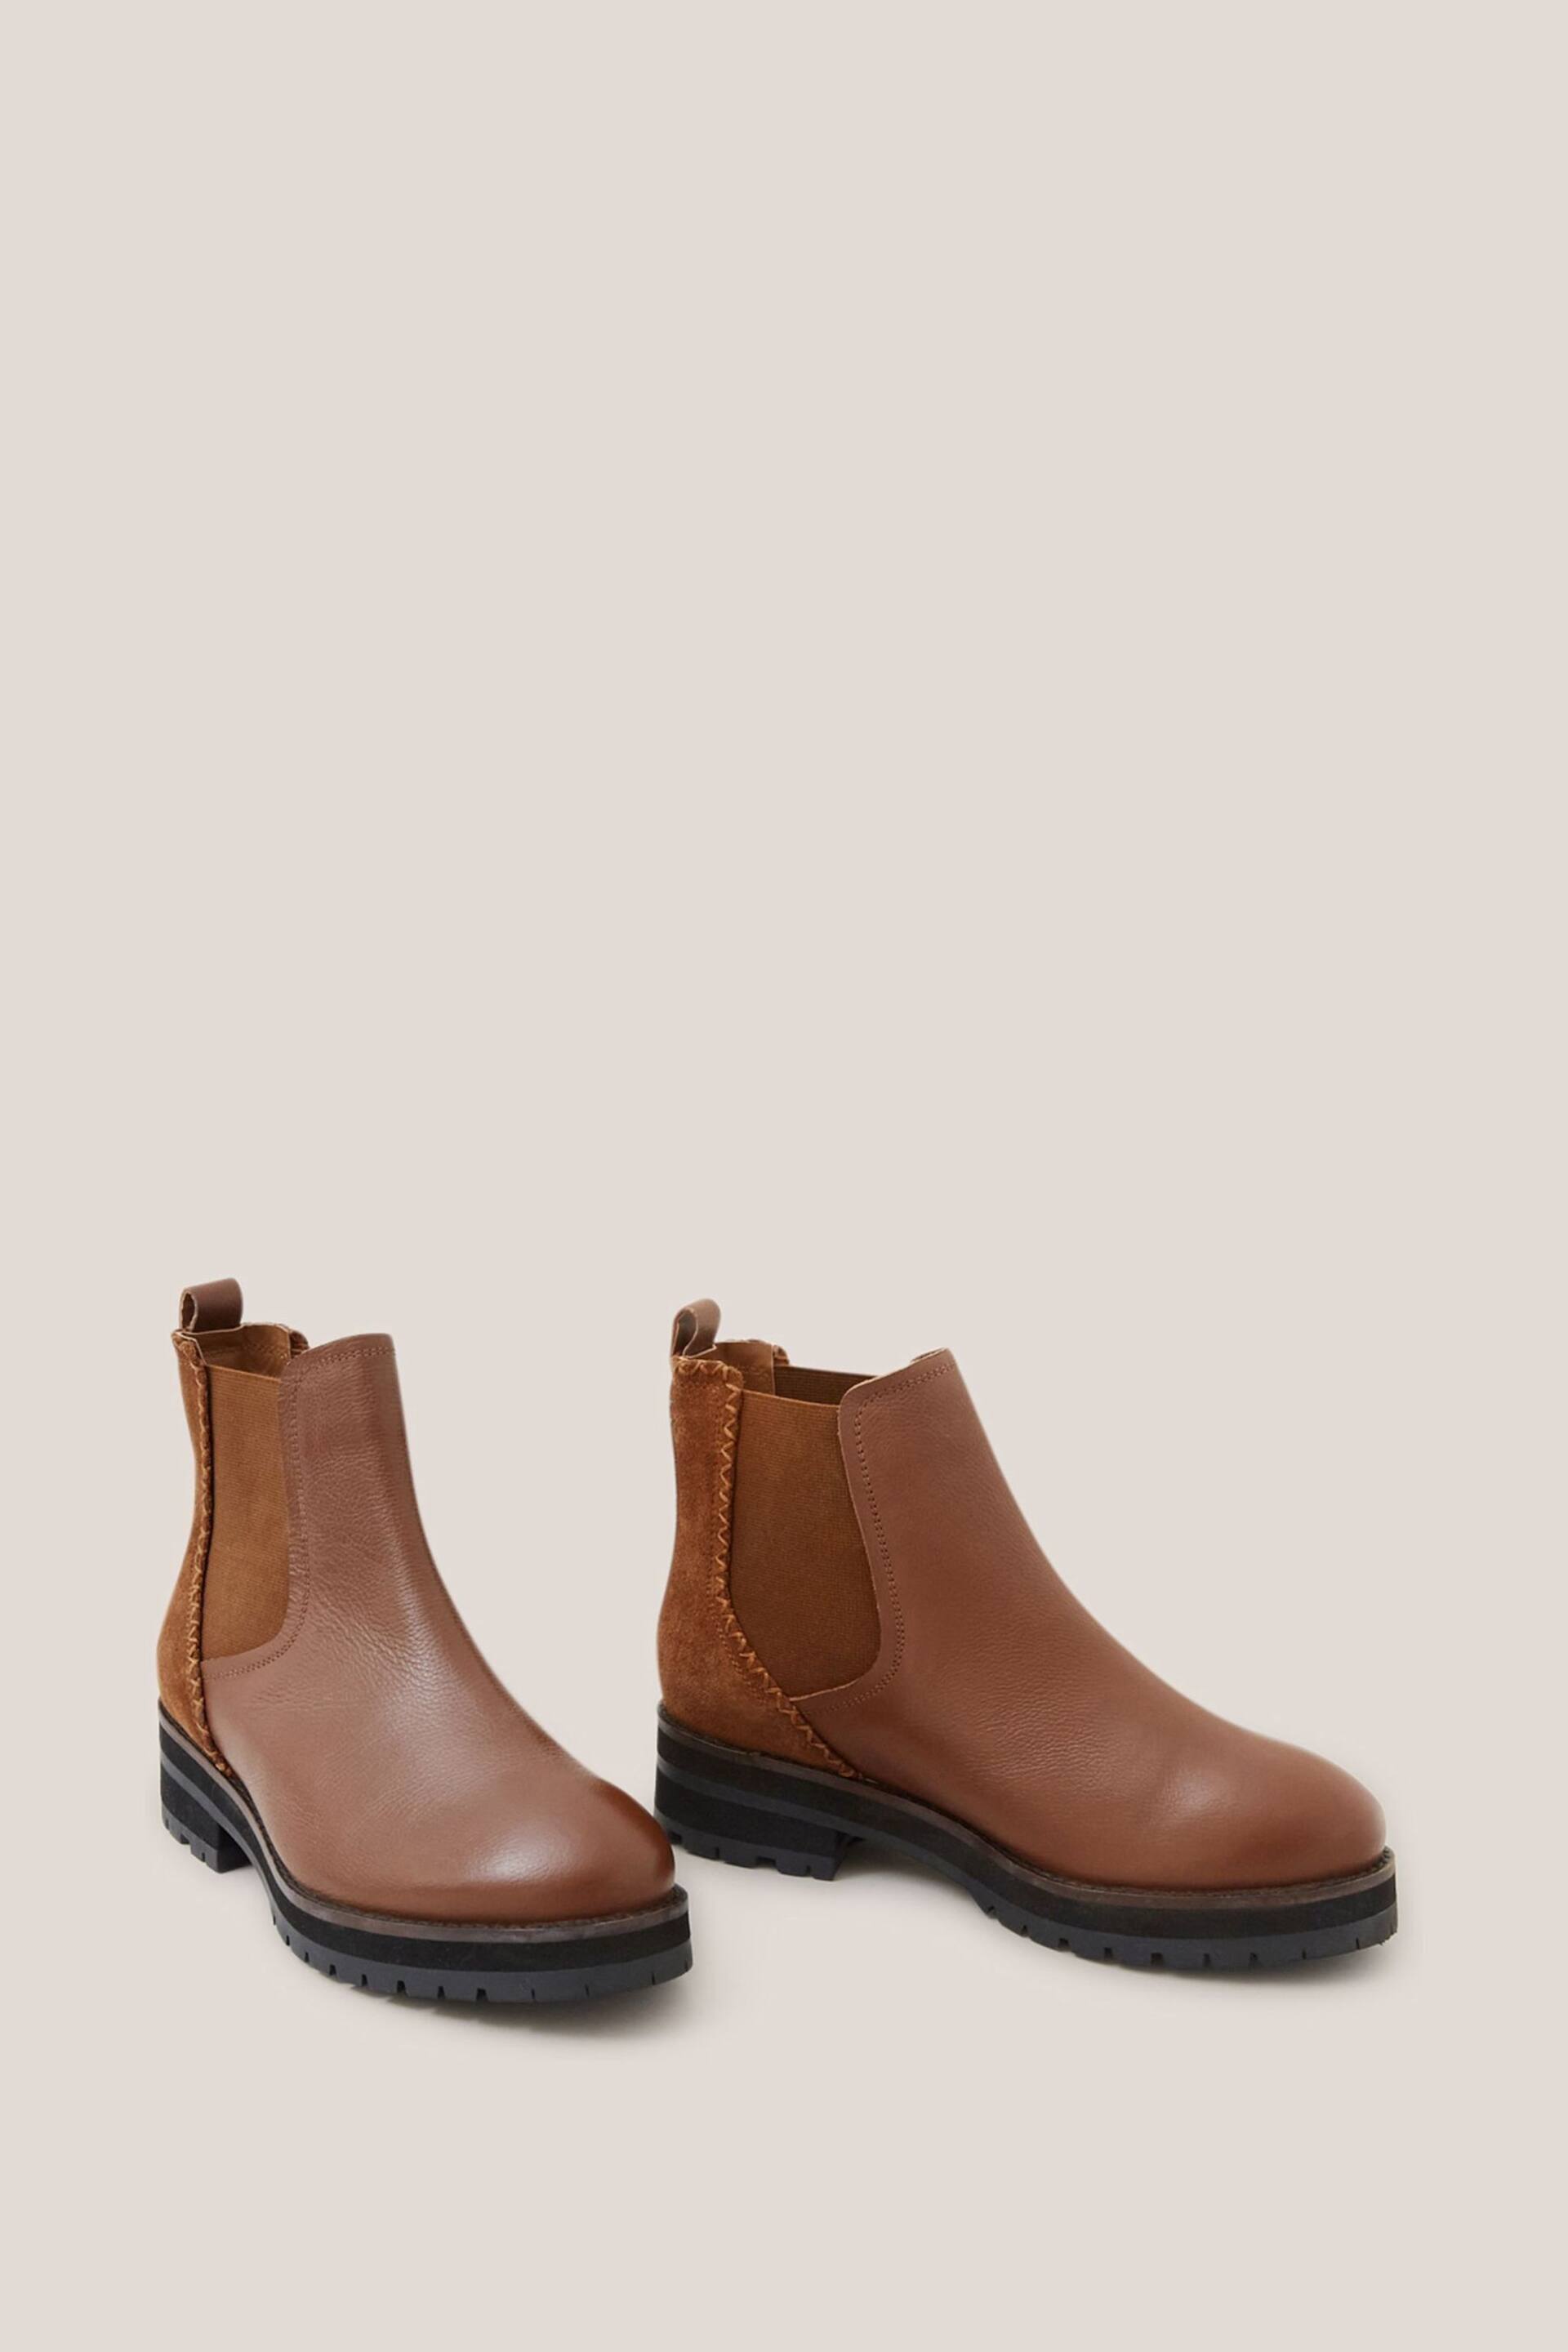 White Stuff Brown Wide Fit Leather Chelsea Boots - Image 2 of 4